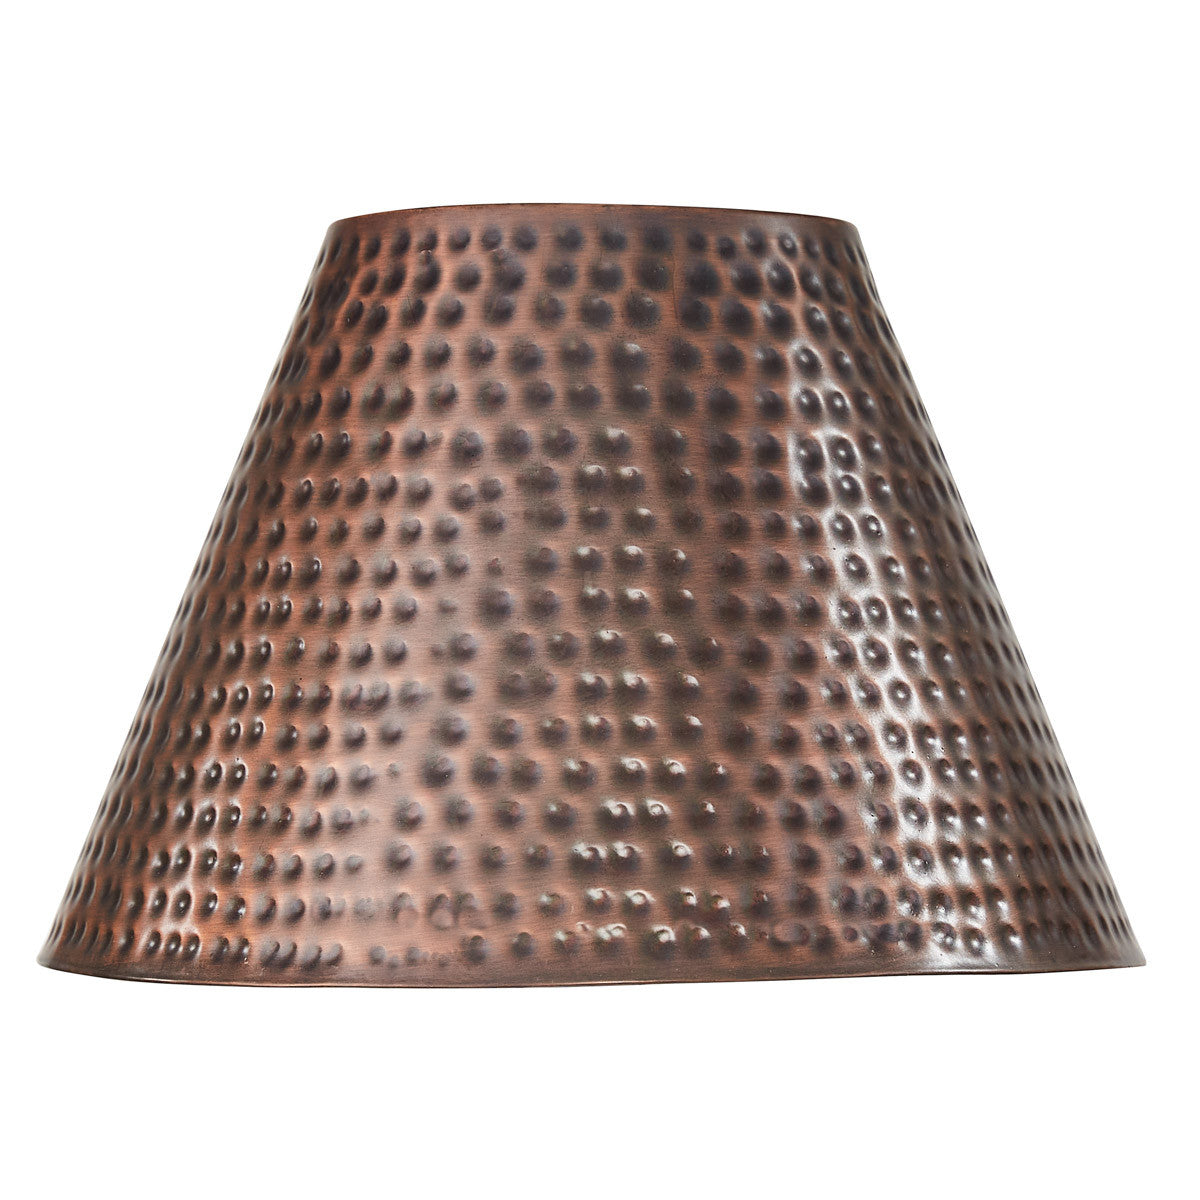 Hammered Copper Finish Lampshade 12" - Park Designs